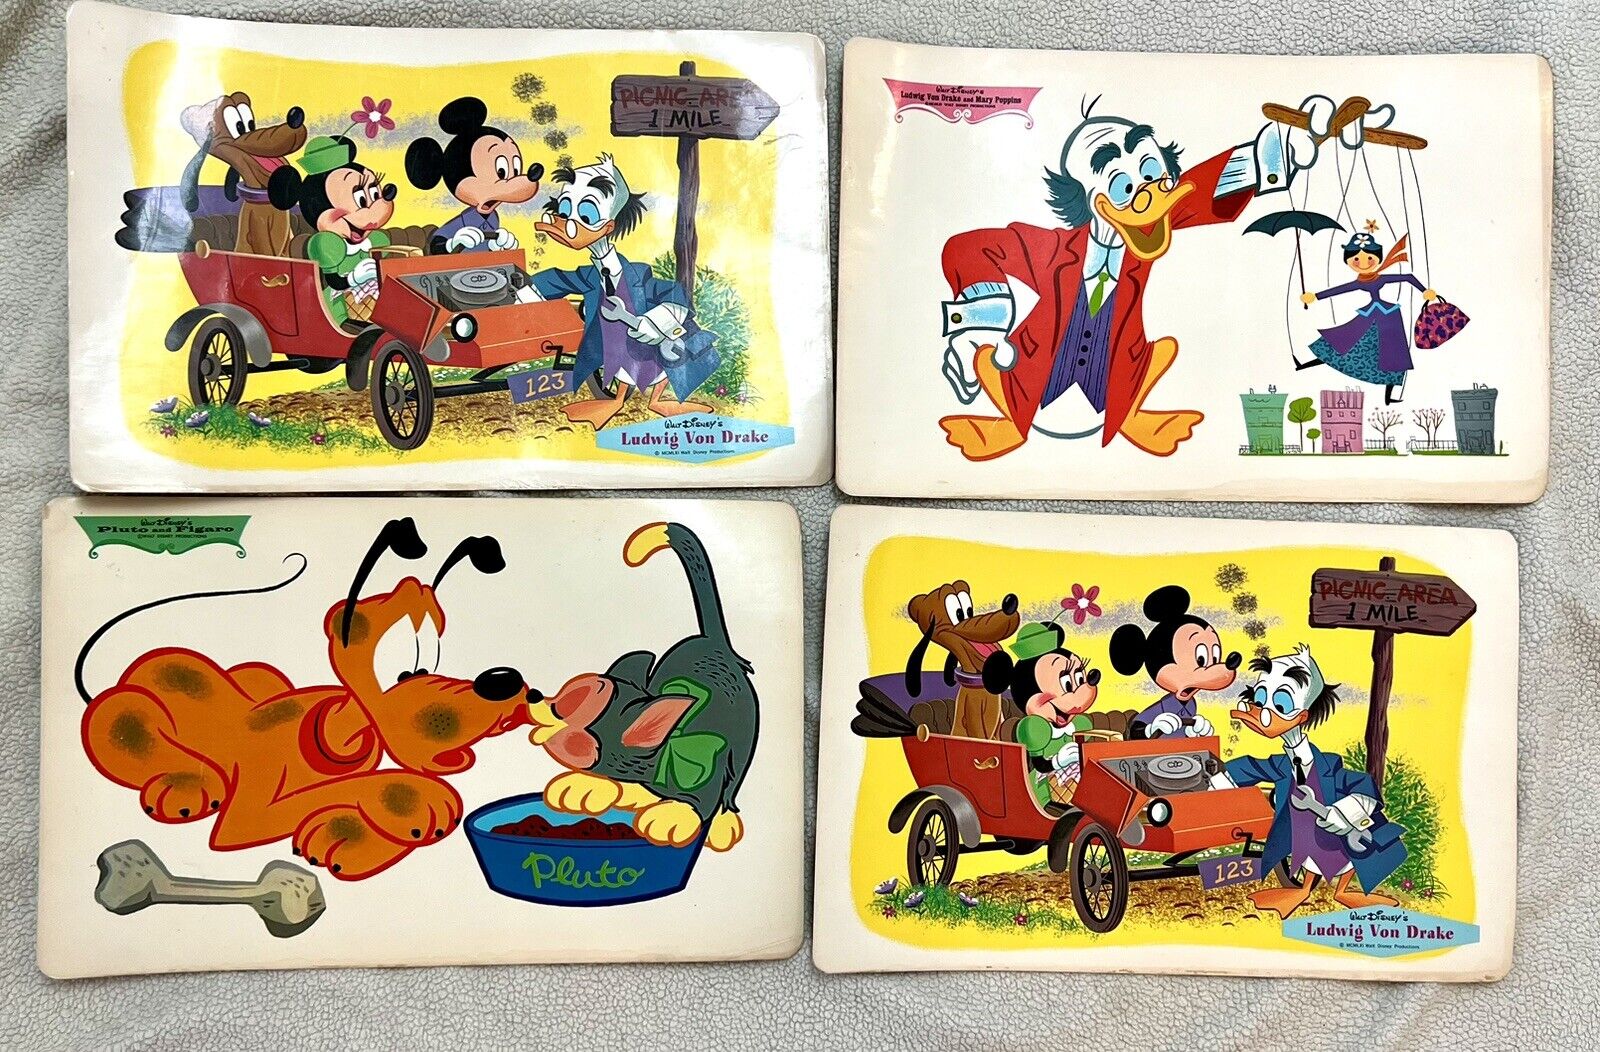 LOT 4 Disney Placemats 1961 Ludwig Von Drake Pluto Mickey Minnie Mary Poppins